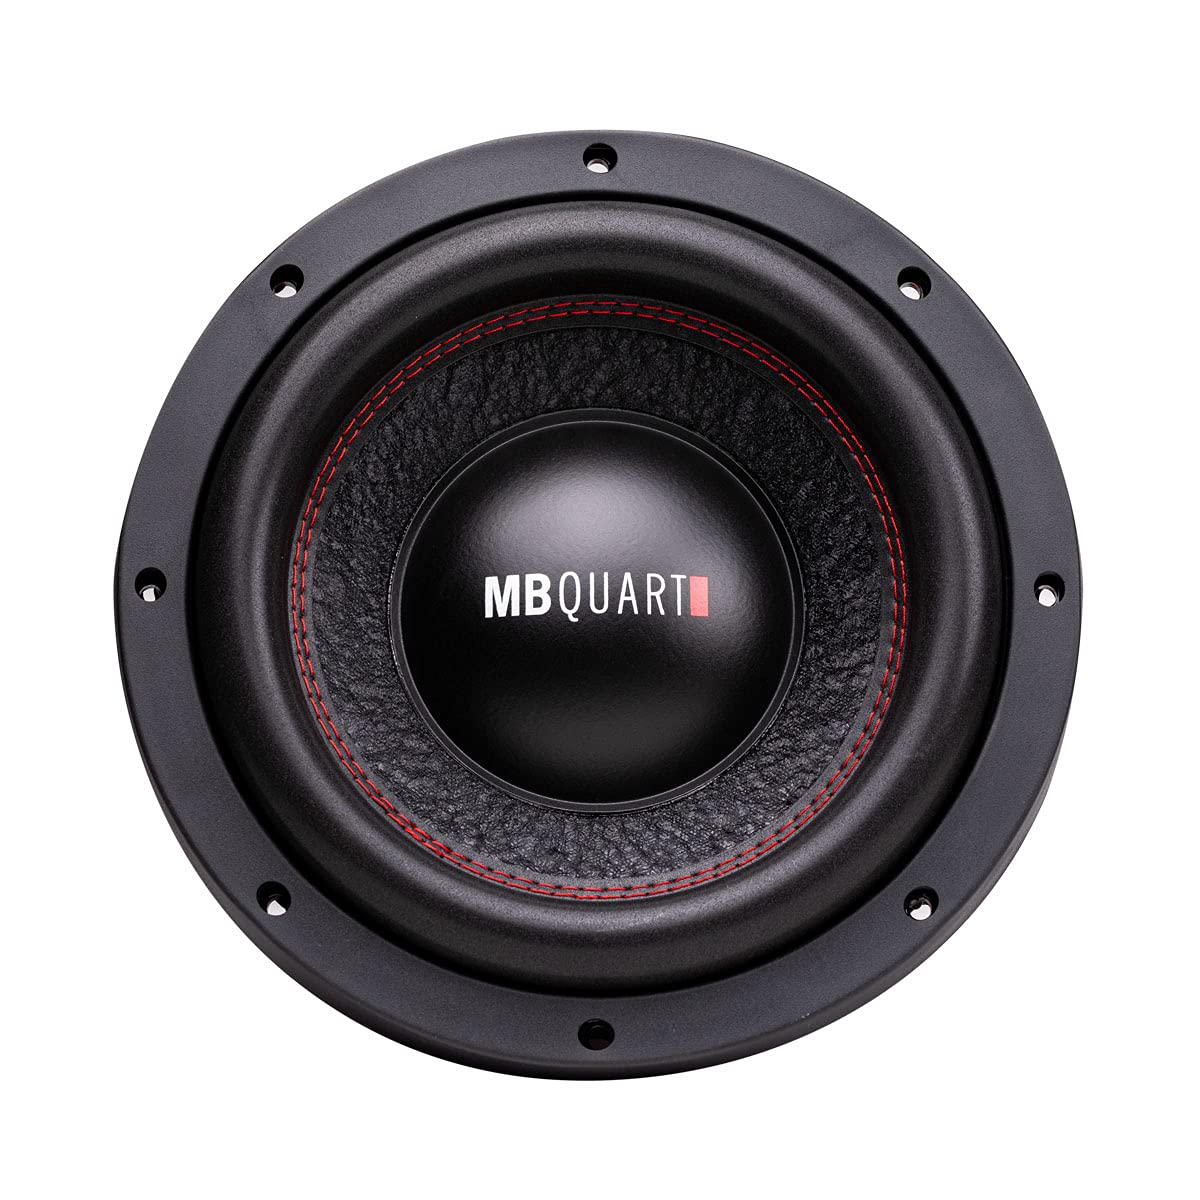 MB Quart RW1-254 Reference Series 10" Subwoofer w/Dual 4-ohm Voice Coils